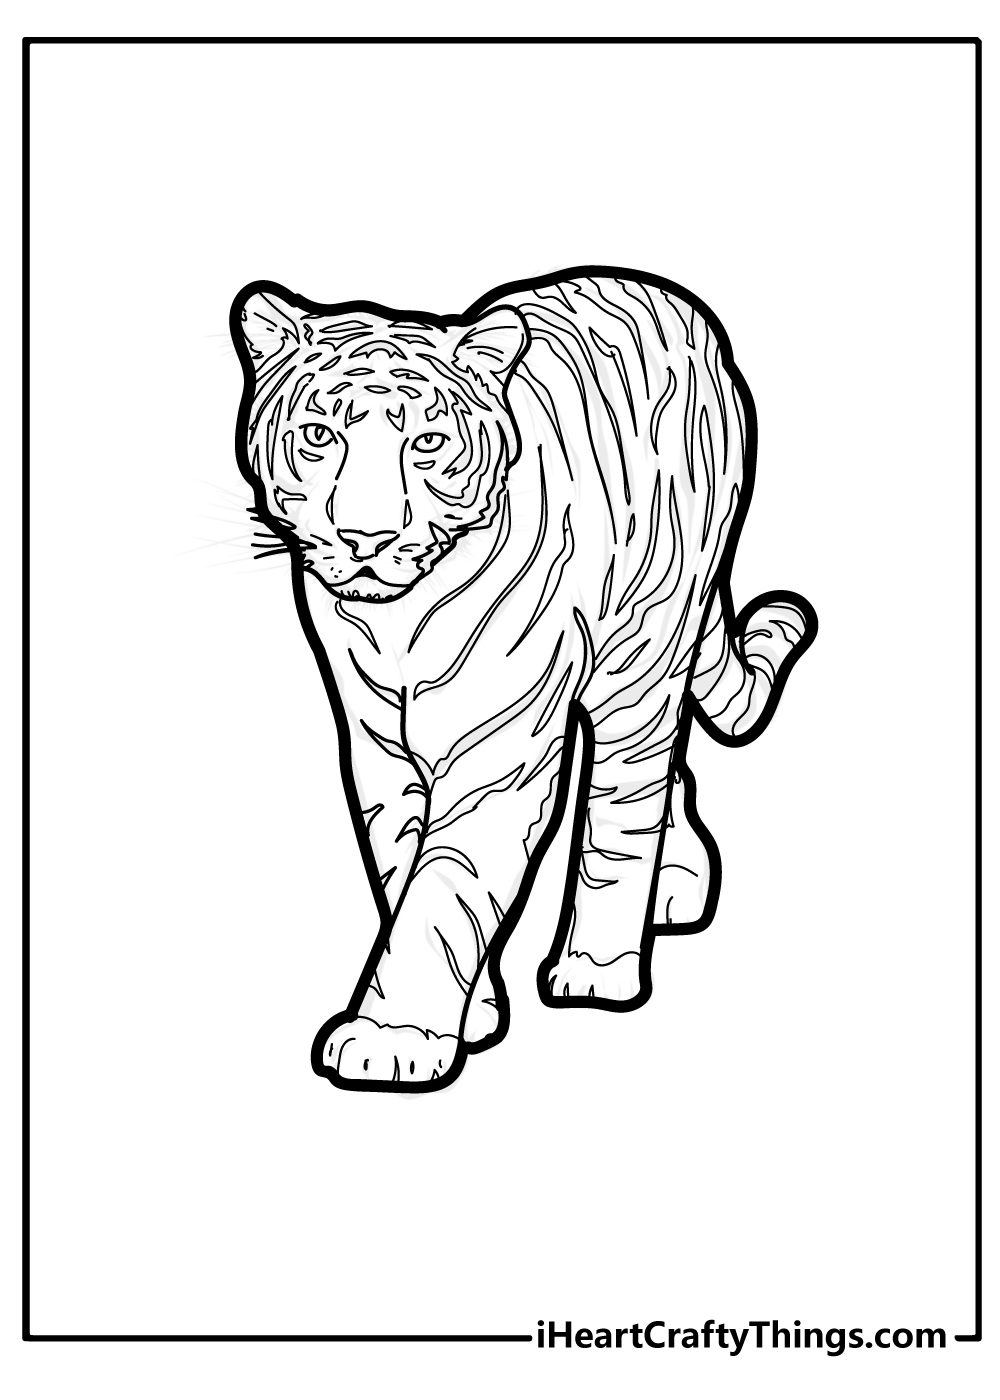 Tiger Coloring Pages for adults free printable